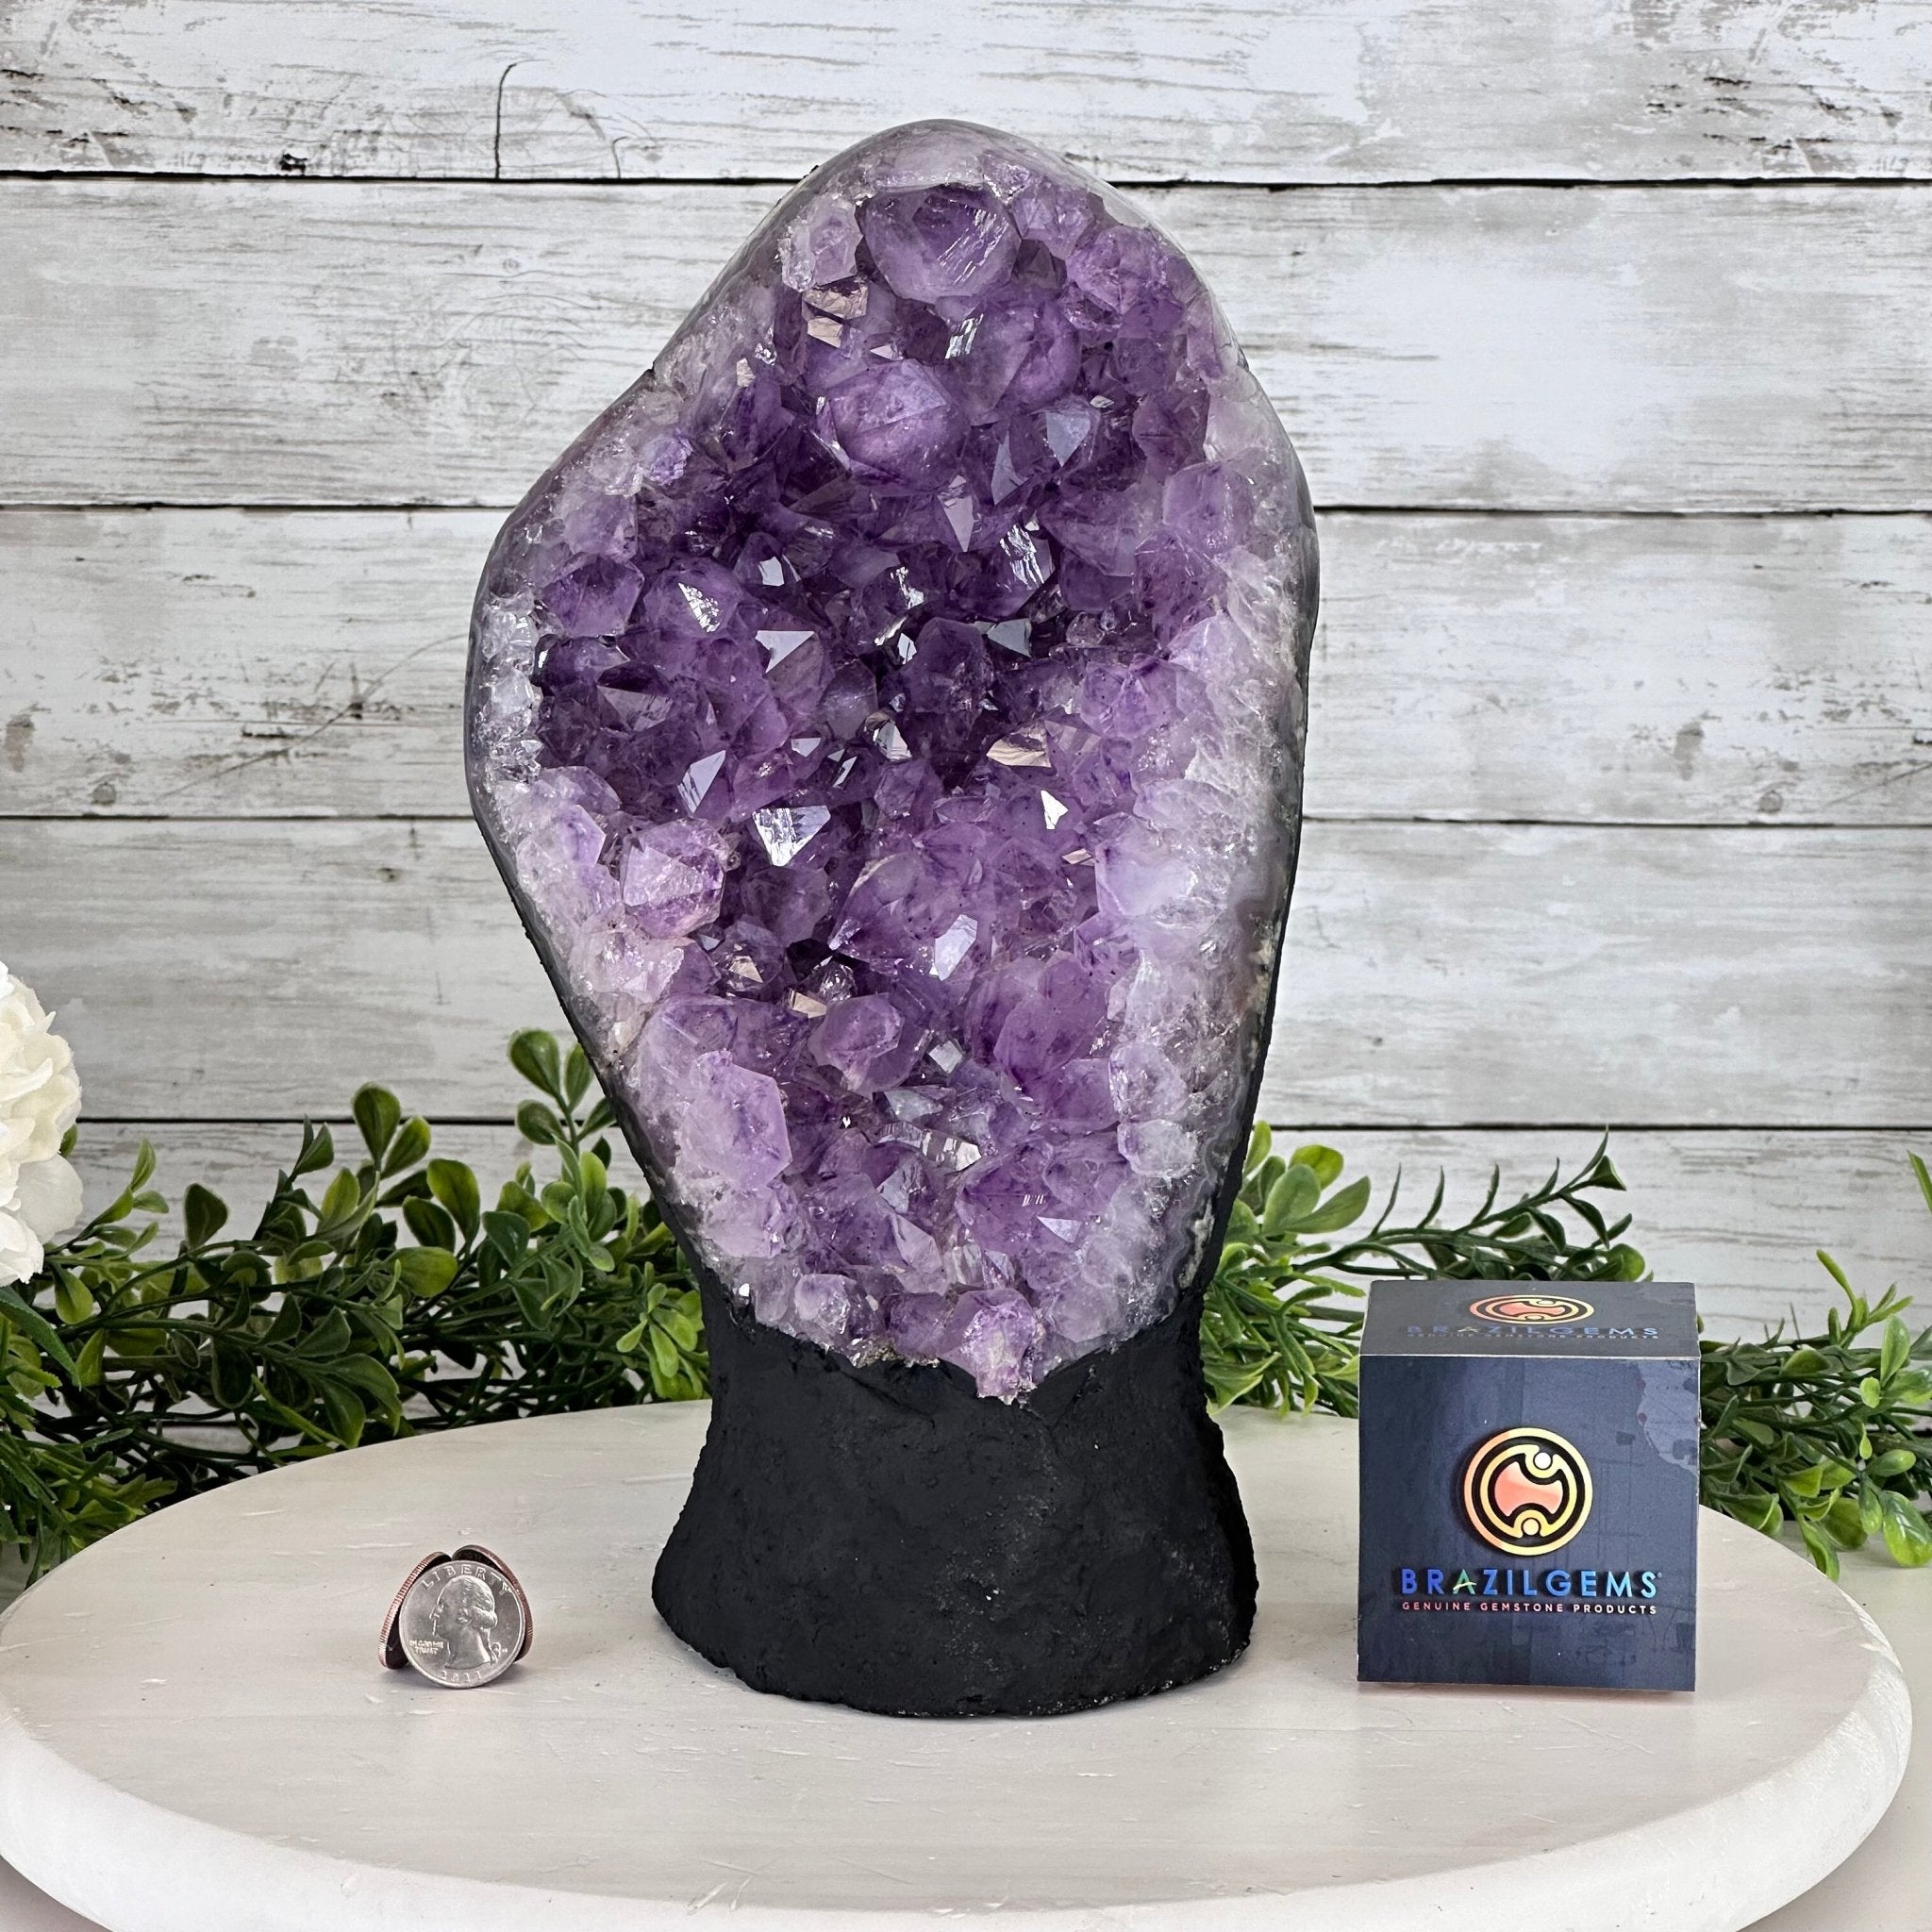 Extra Quality Amethyst Cluster on Cement Base, 12 lbs & 11.75" Tall #5614-0098 - Brazil GemsBrazil GemsExtra Quality Amethyst Cluster on Cement Base, 12 lbs & 11.75" Tall #5614-0098Clusters on Cement Bases5614-0098